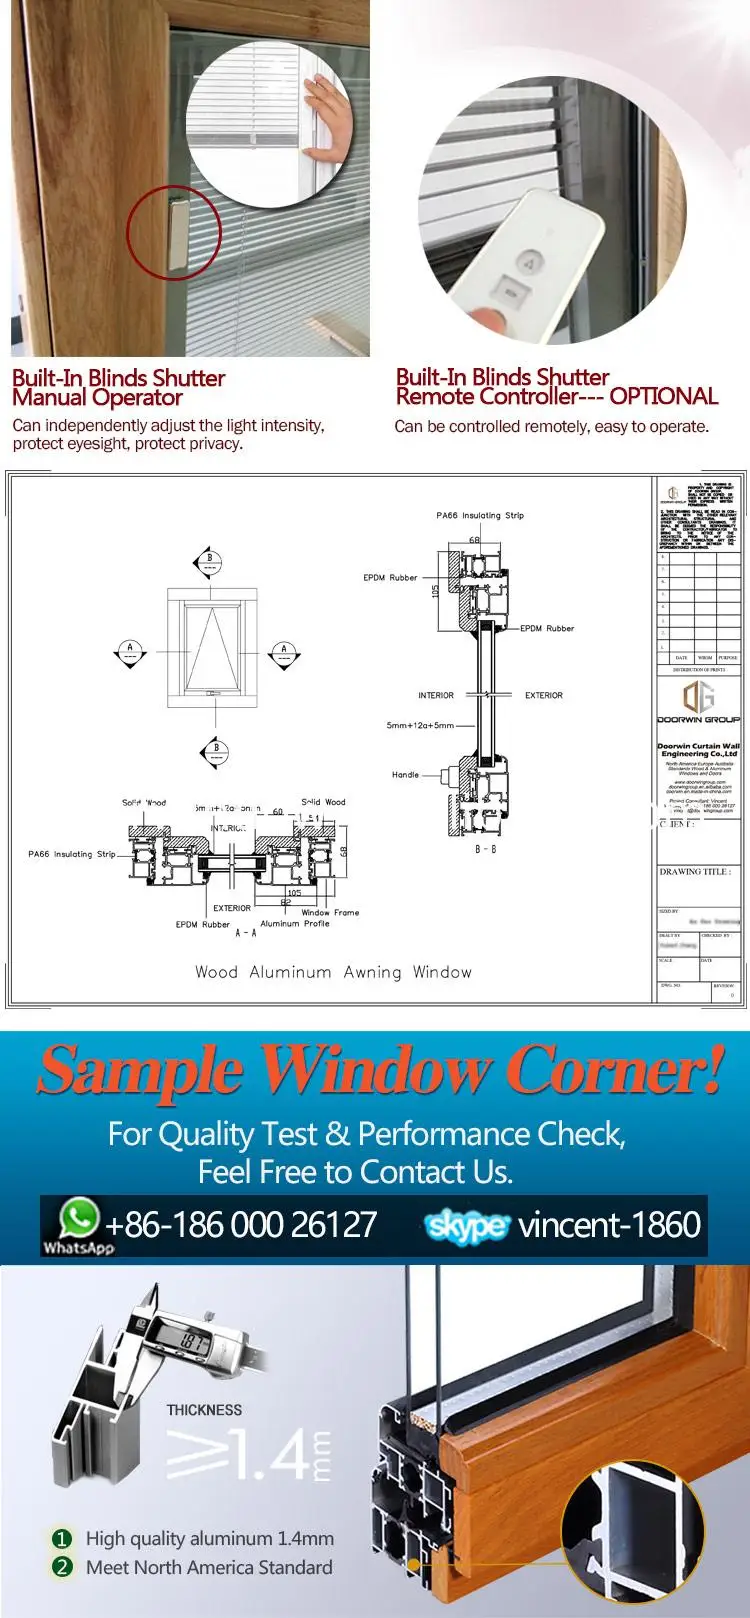 shutter components wooden awning window